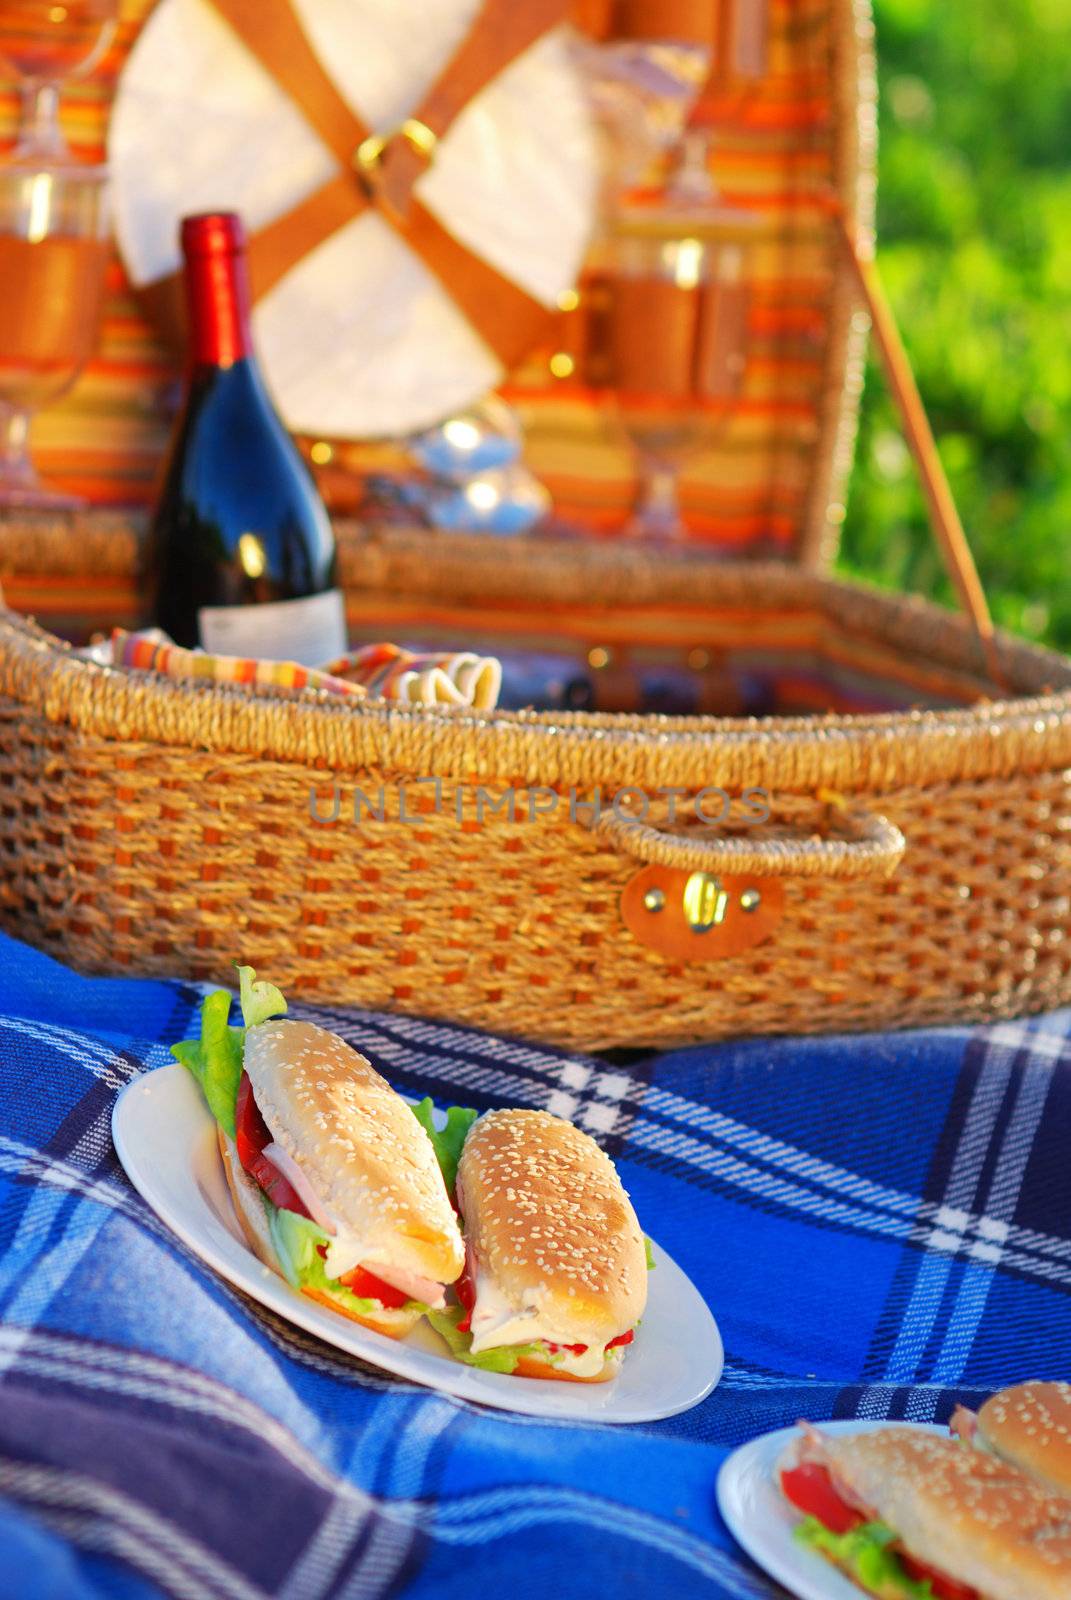 Picnic sandwiches  by haveseen